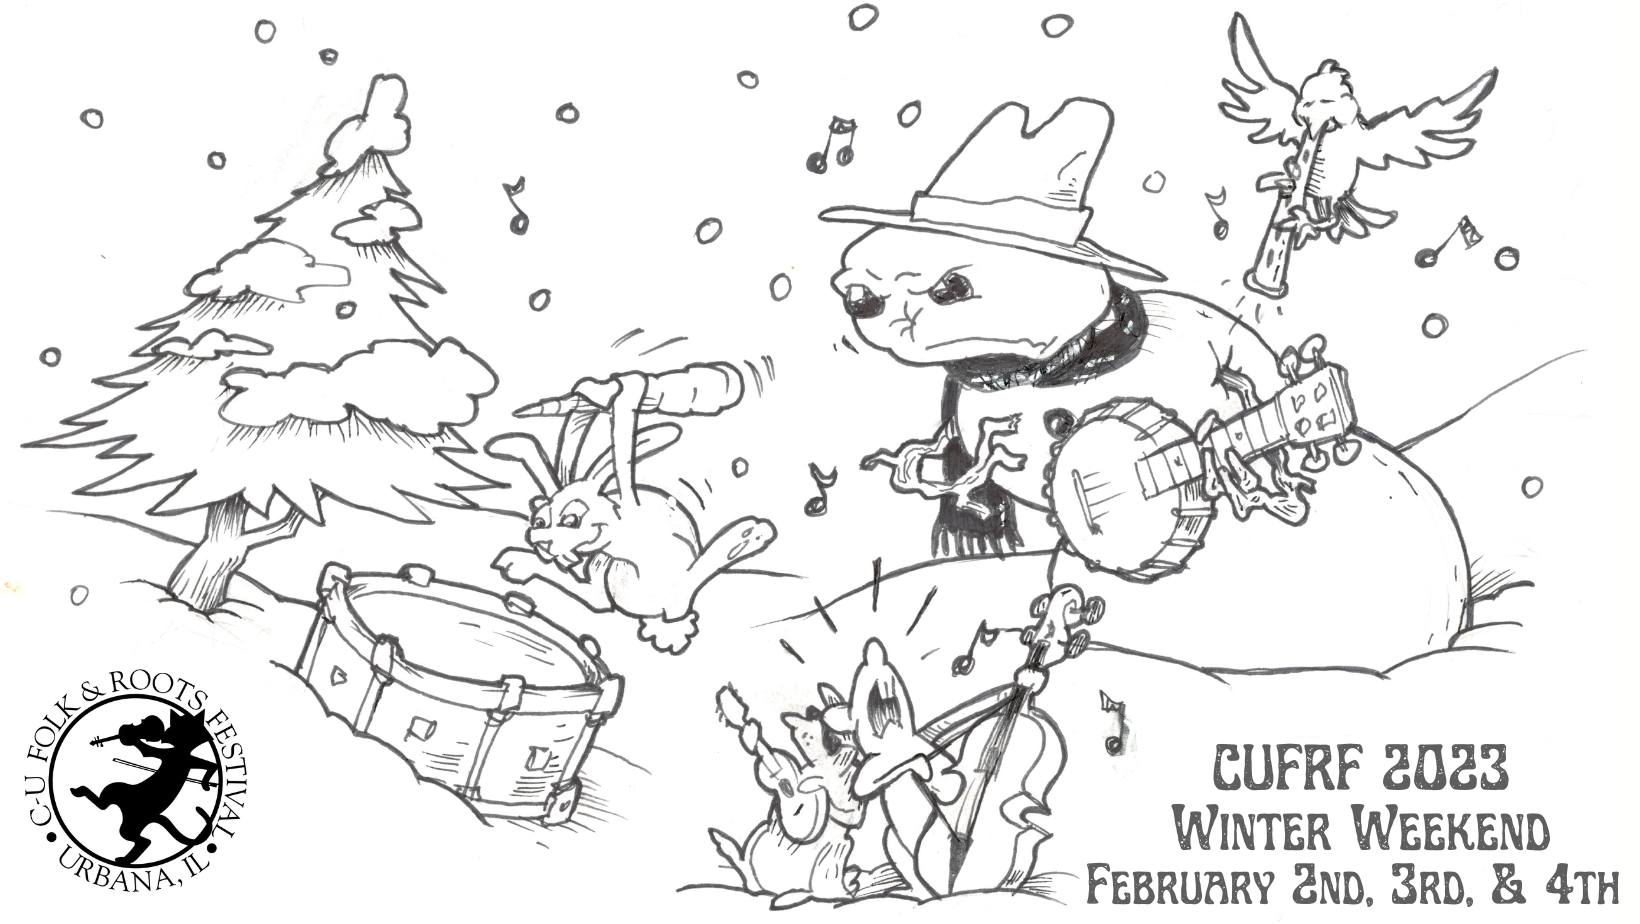 CU Folk and Roots Winter Weekend starts Thursday, February 2nd